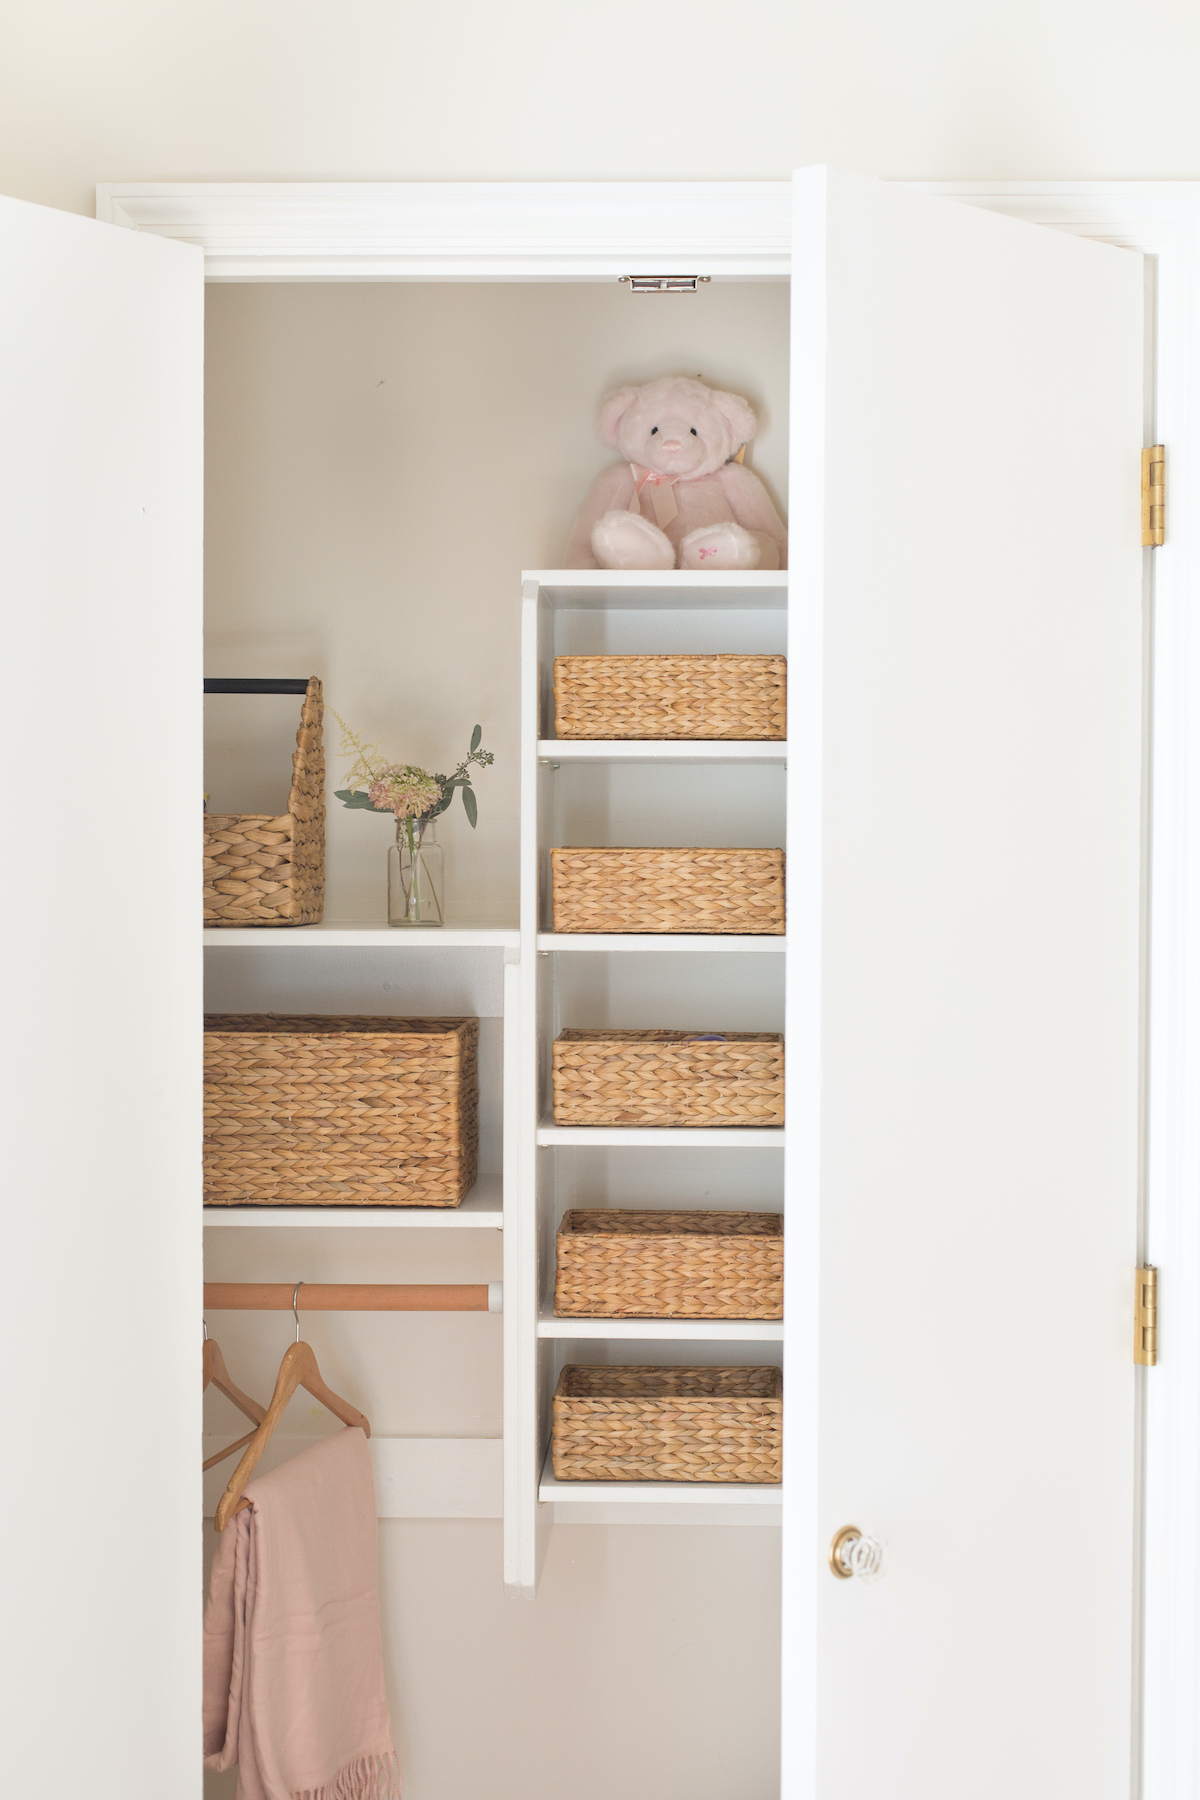 A white closet with wicker baskets for home organization and a teddy bear.